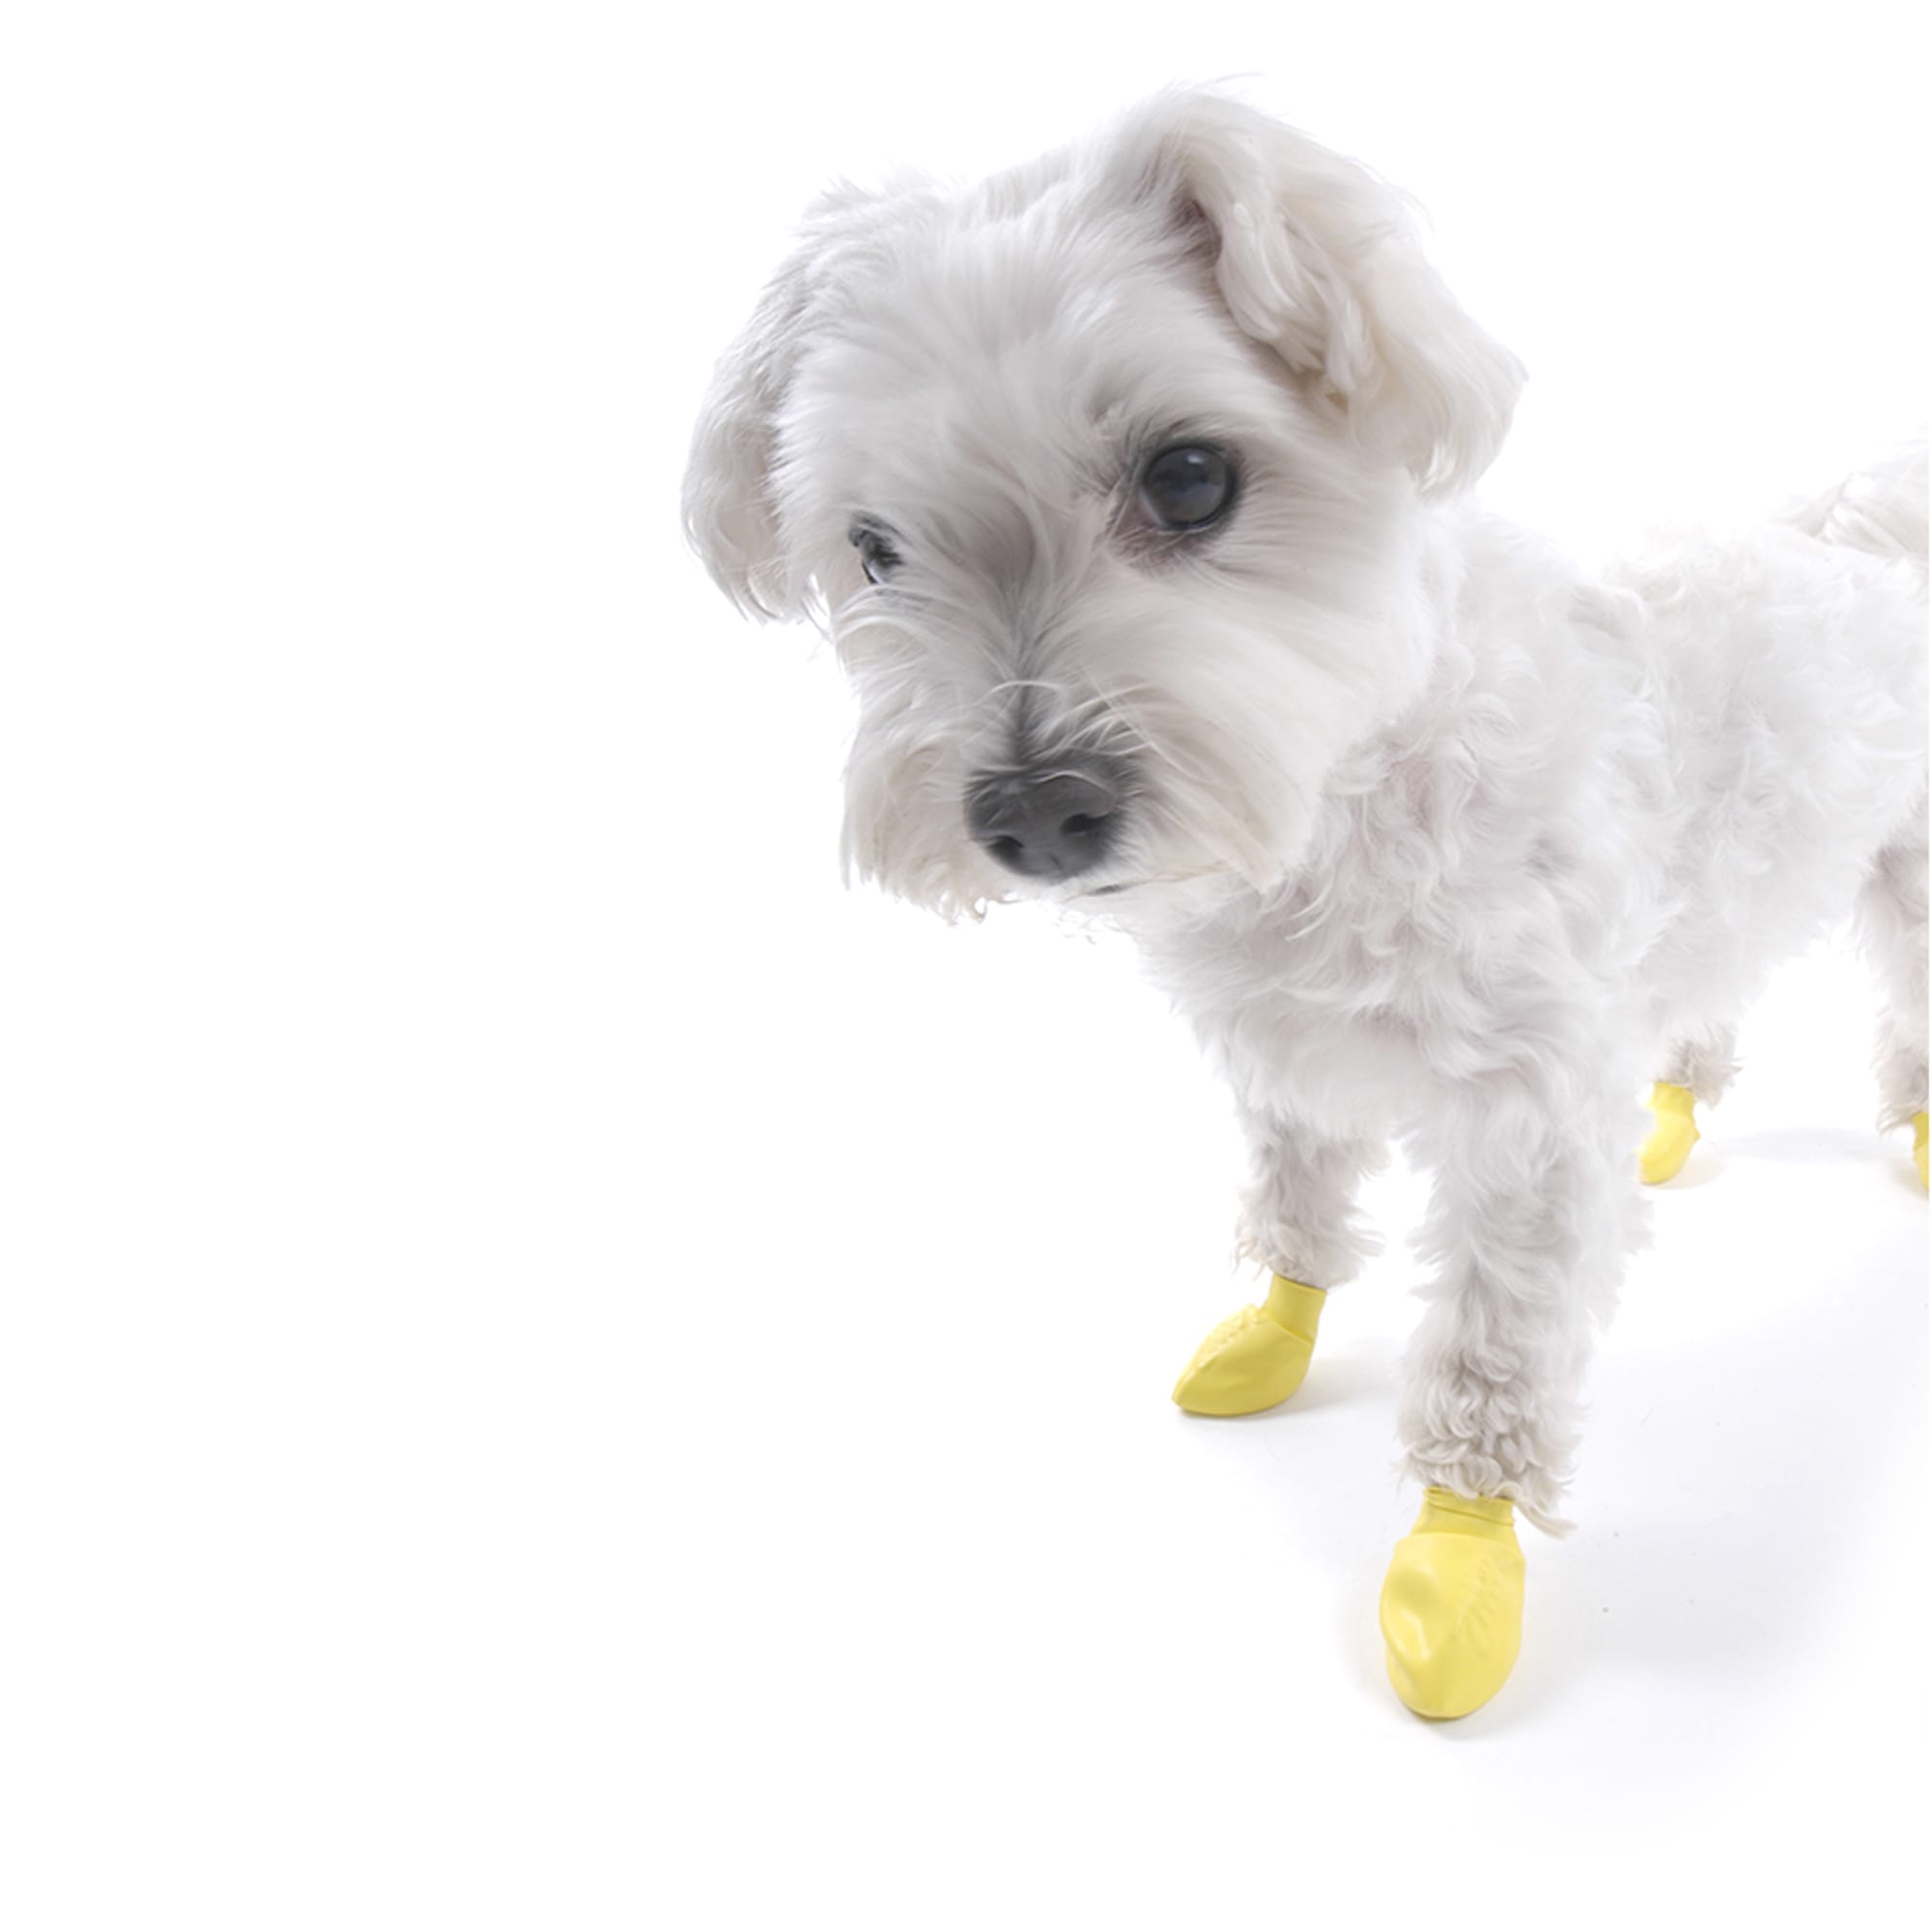 Pawz Disposable Dog Boots for Small Dogs from Golly Gear